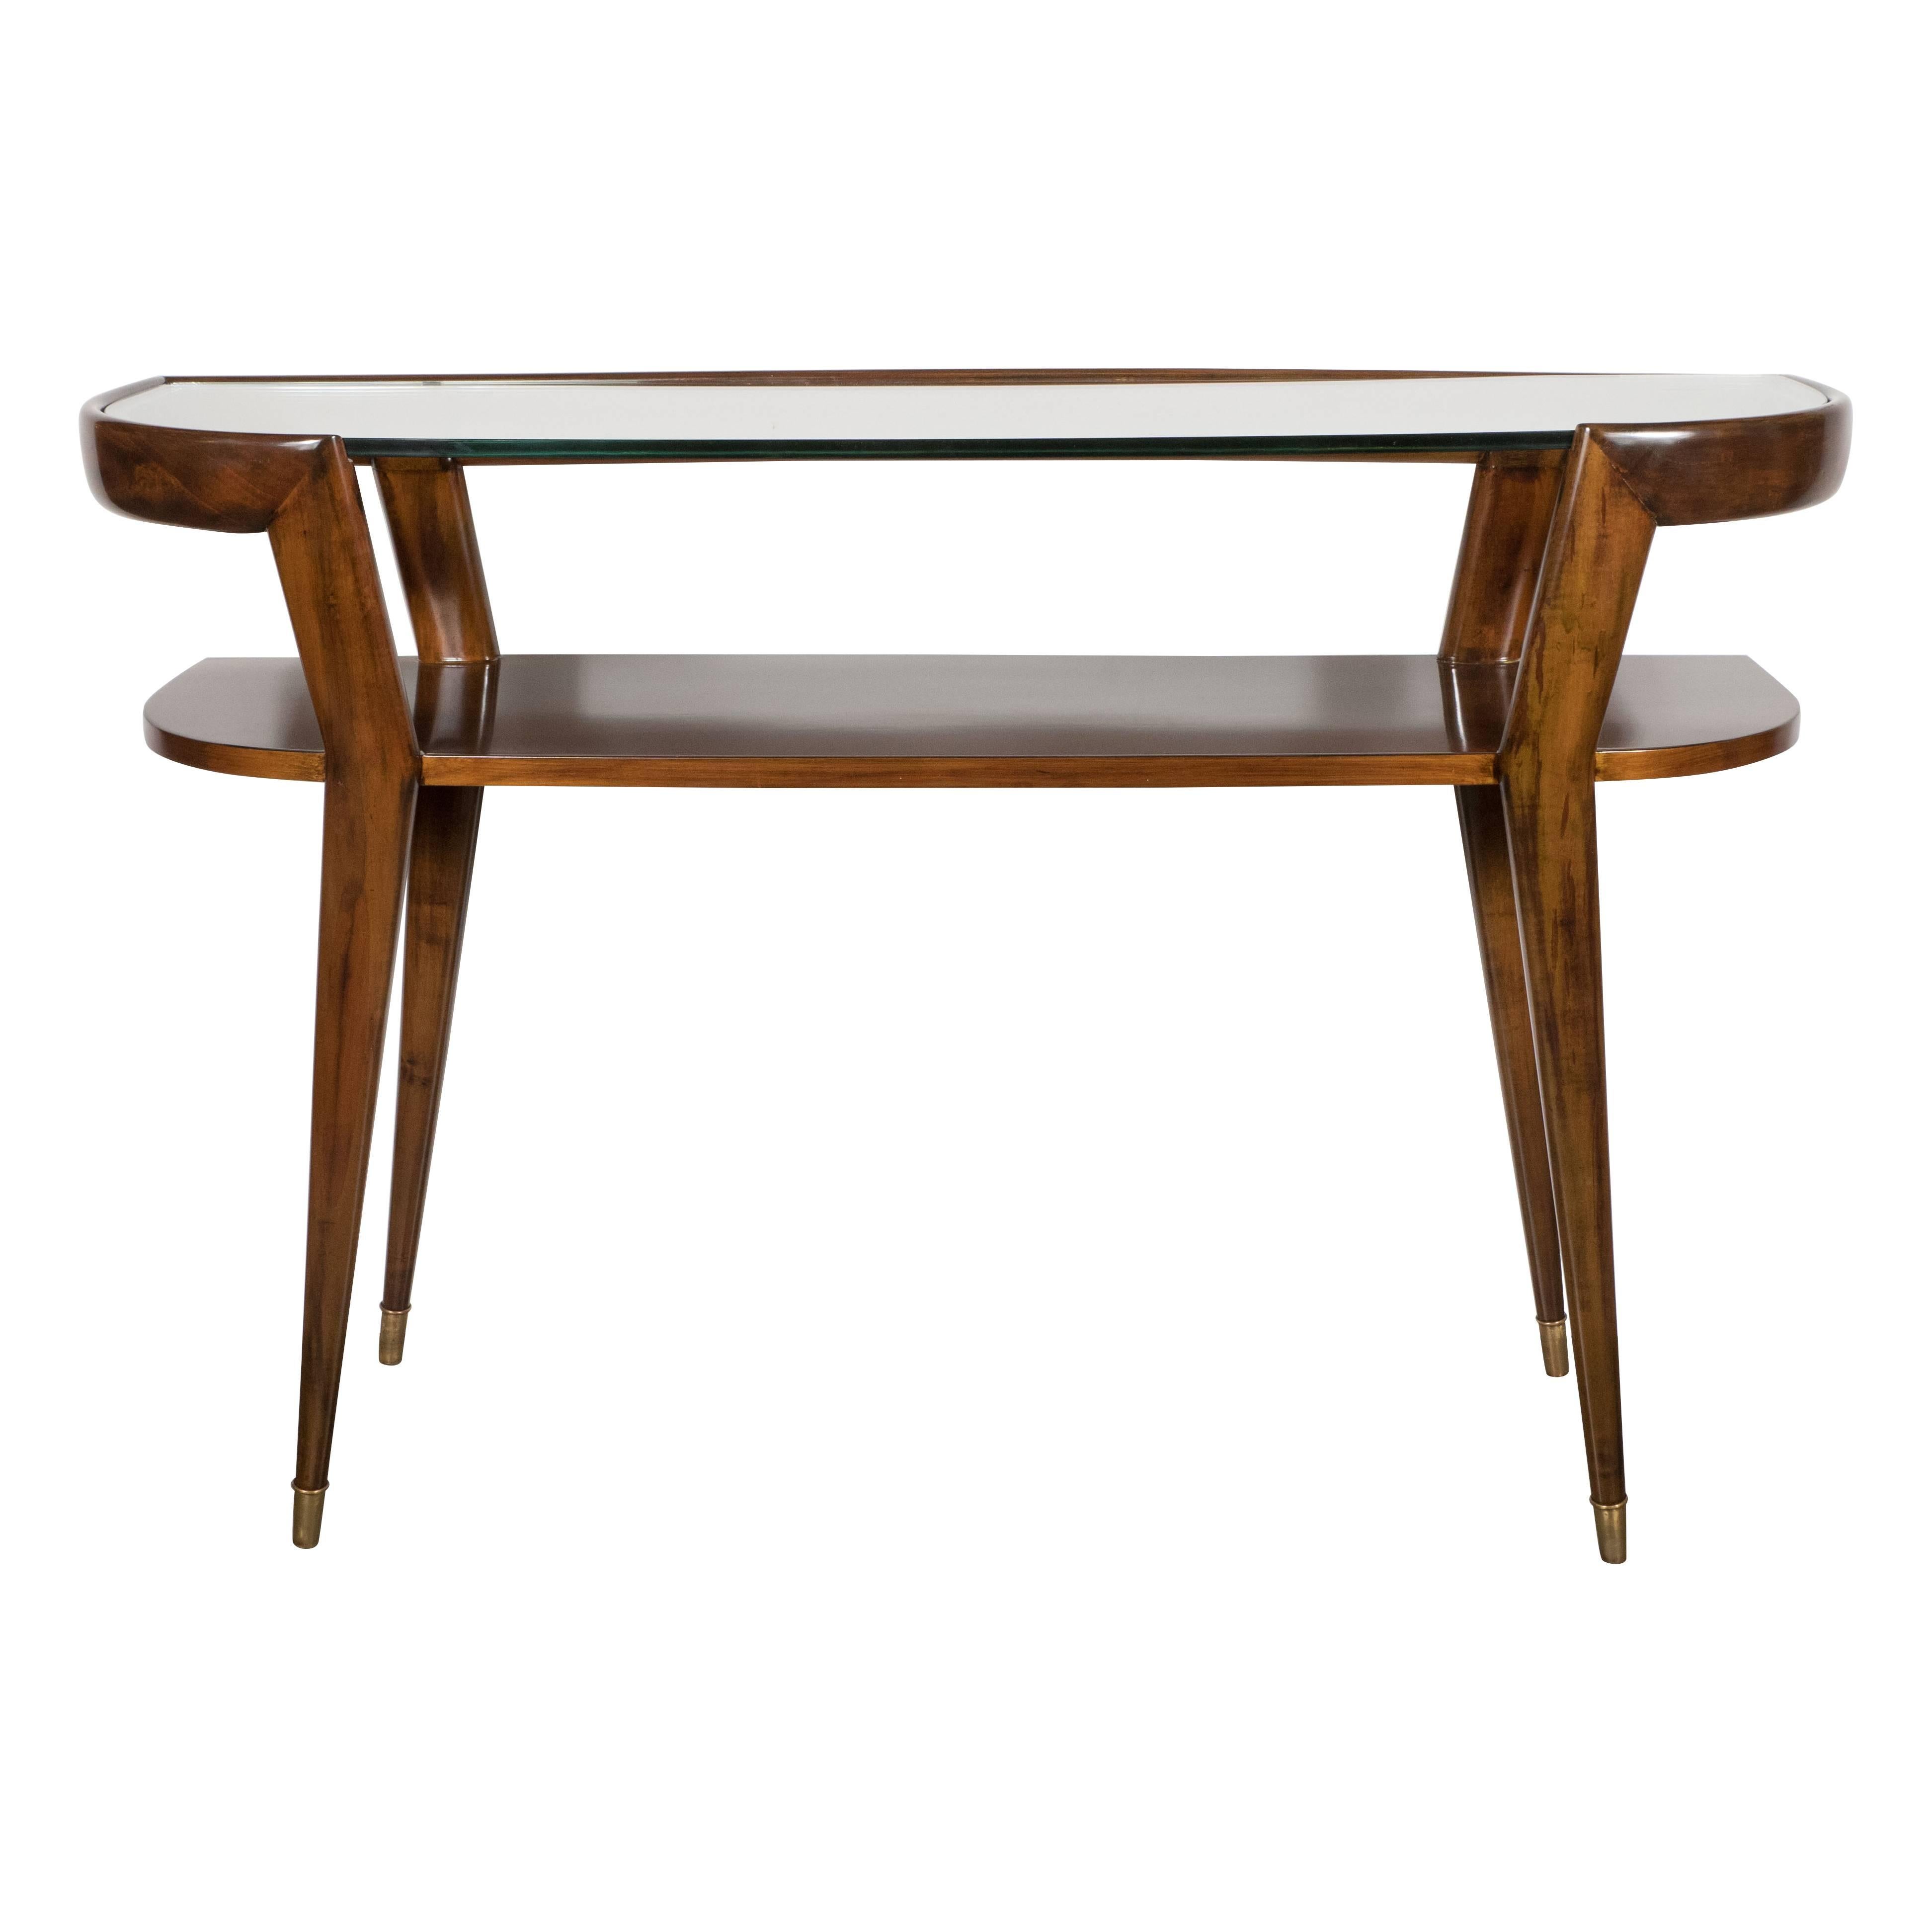 Sophisticated Mid-Century Modernist Console in Hand Rubbed Walnut and Glass